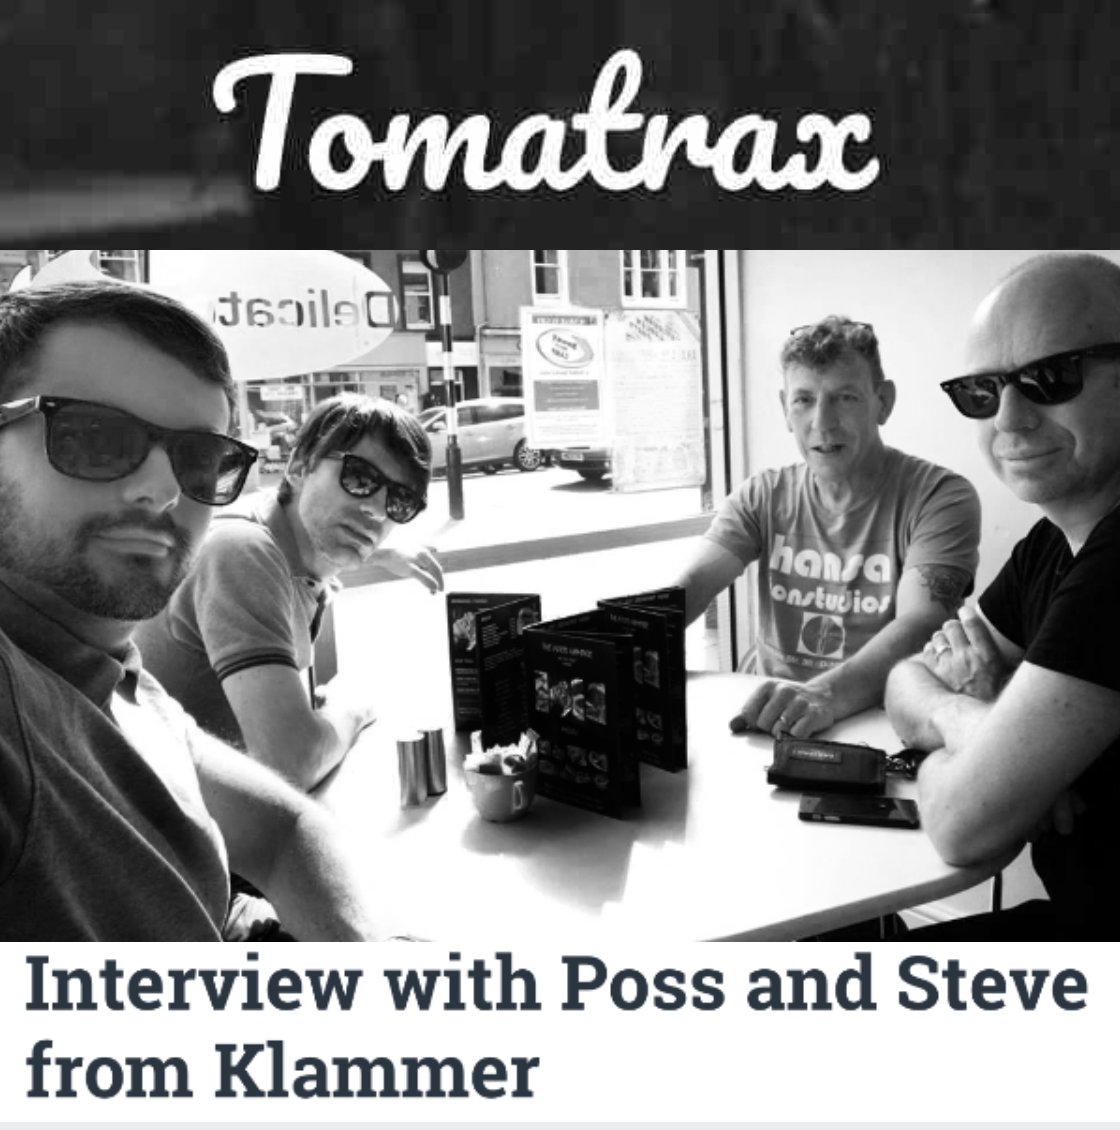 Australia's @Tomatrax speaks with Poss and Steve Whitfield of @KLAMMERband about their new album 'You Have Been Processed', being compared to #XTC and #GangofFour, songwriting, and Steve's lively career as producer of such bands as @TheCure & #TheMission ~ goo.gl/WszdQZ